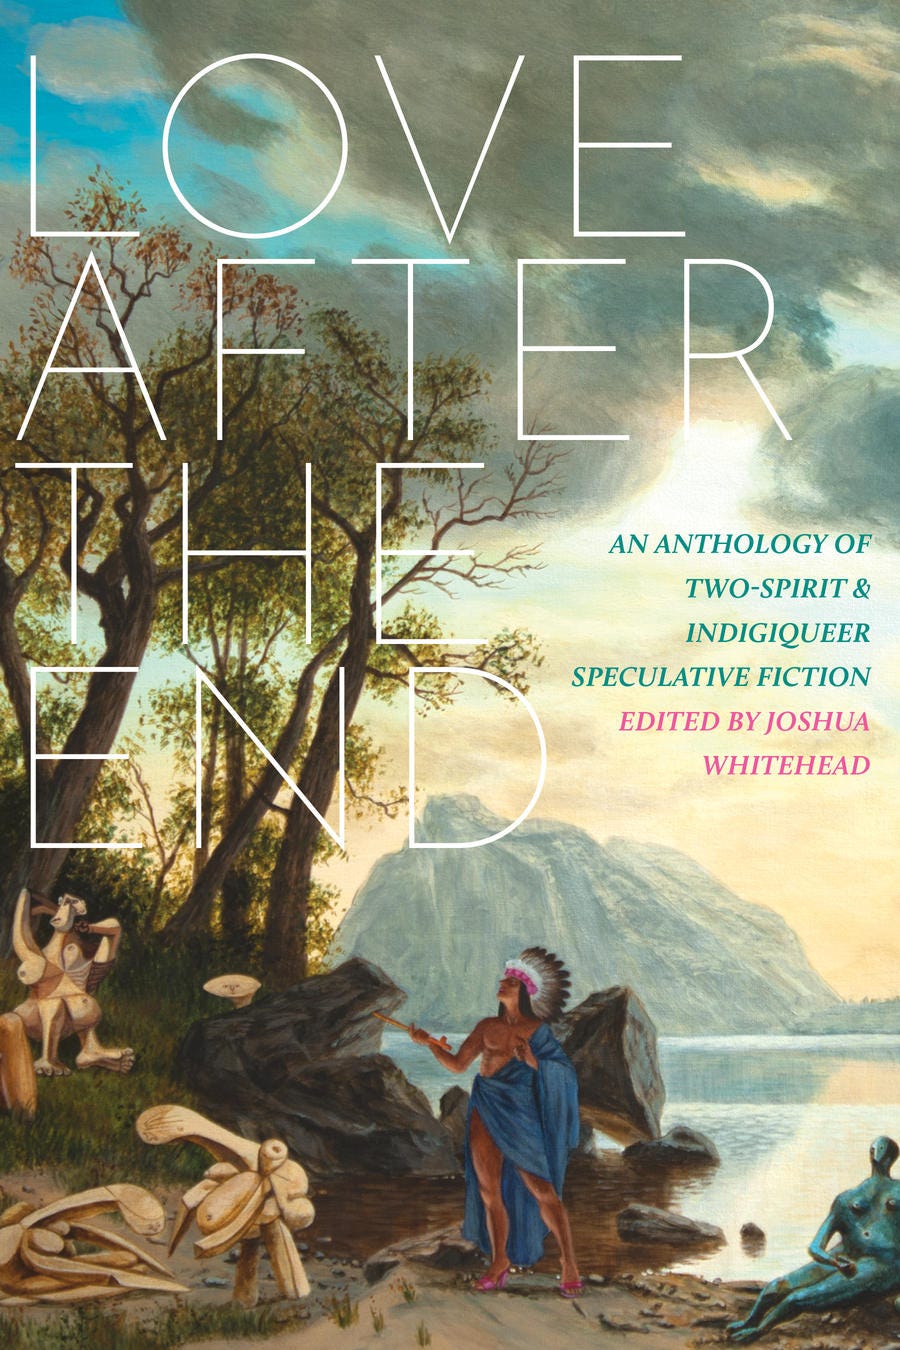 Cover art of Love After The End, edited by Joshua Whitehead